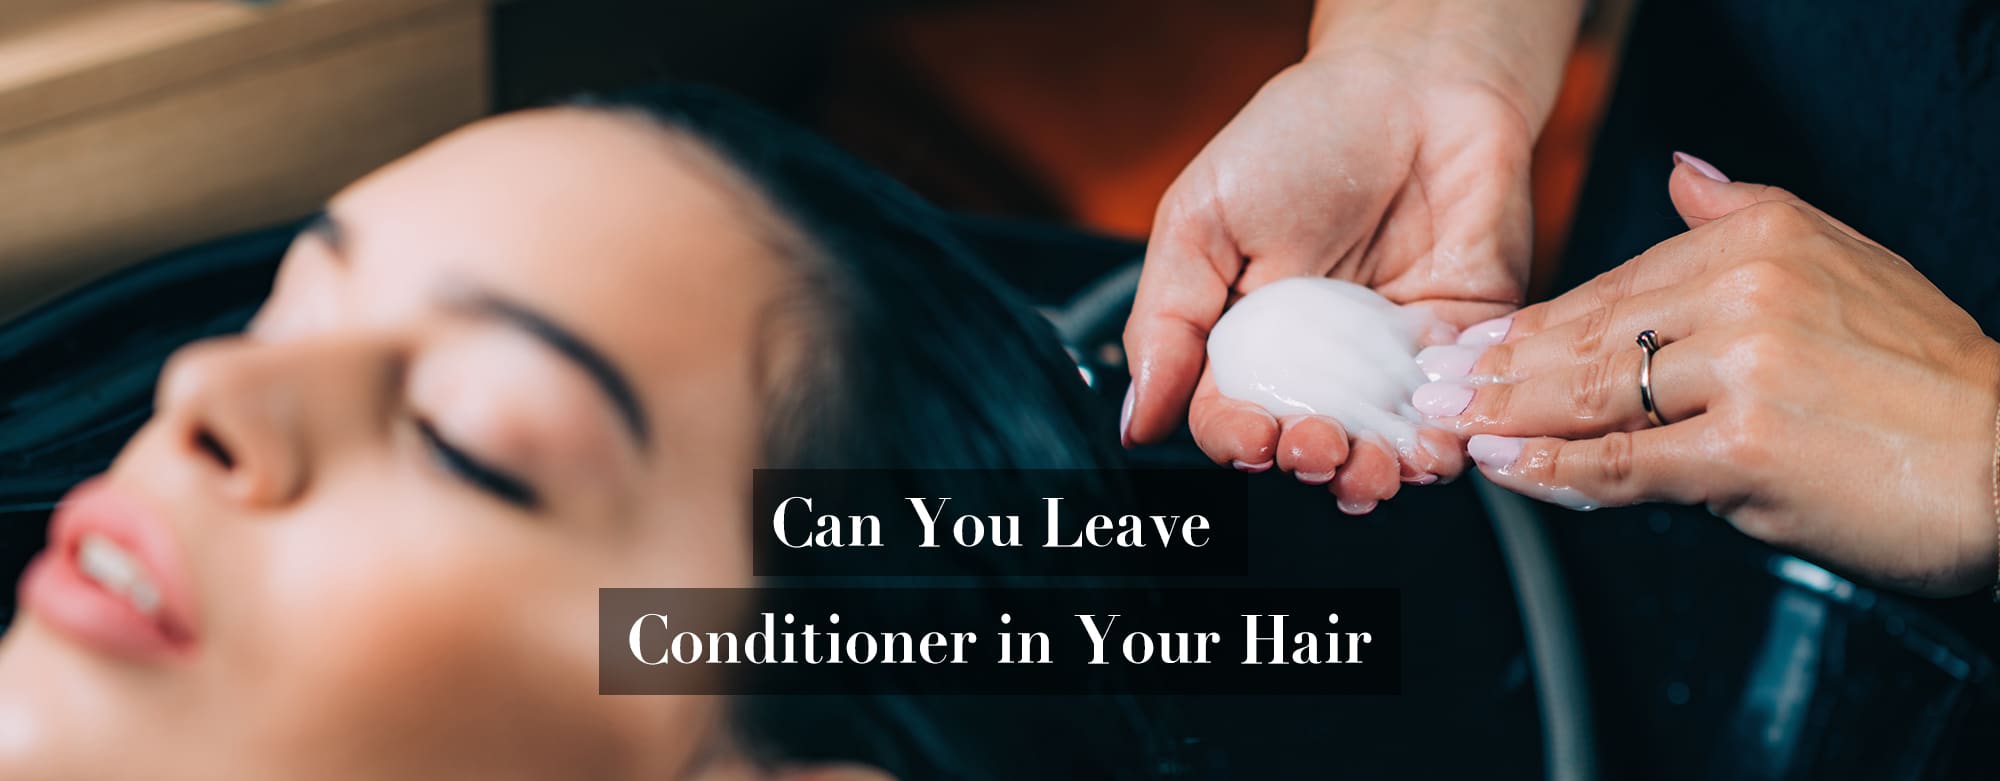 can you leave conditioner in your hair ft